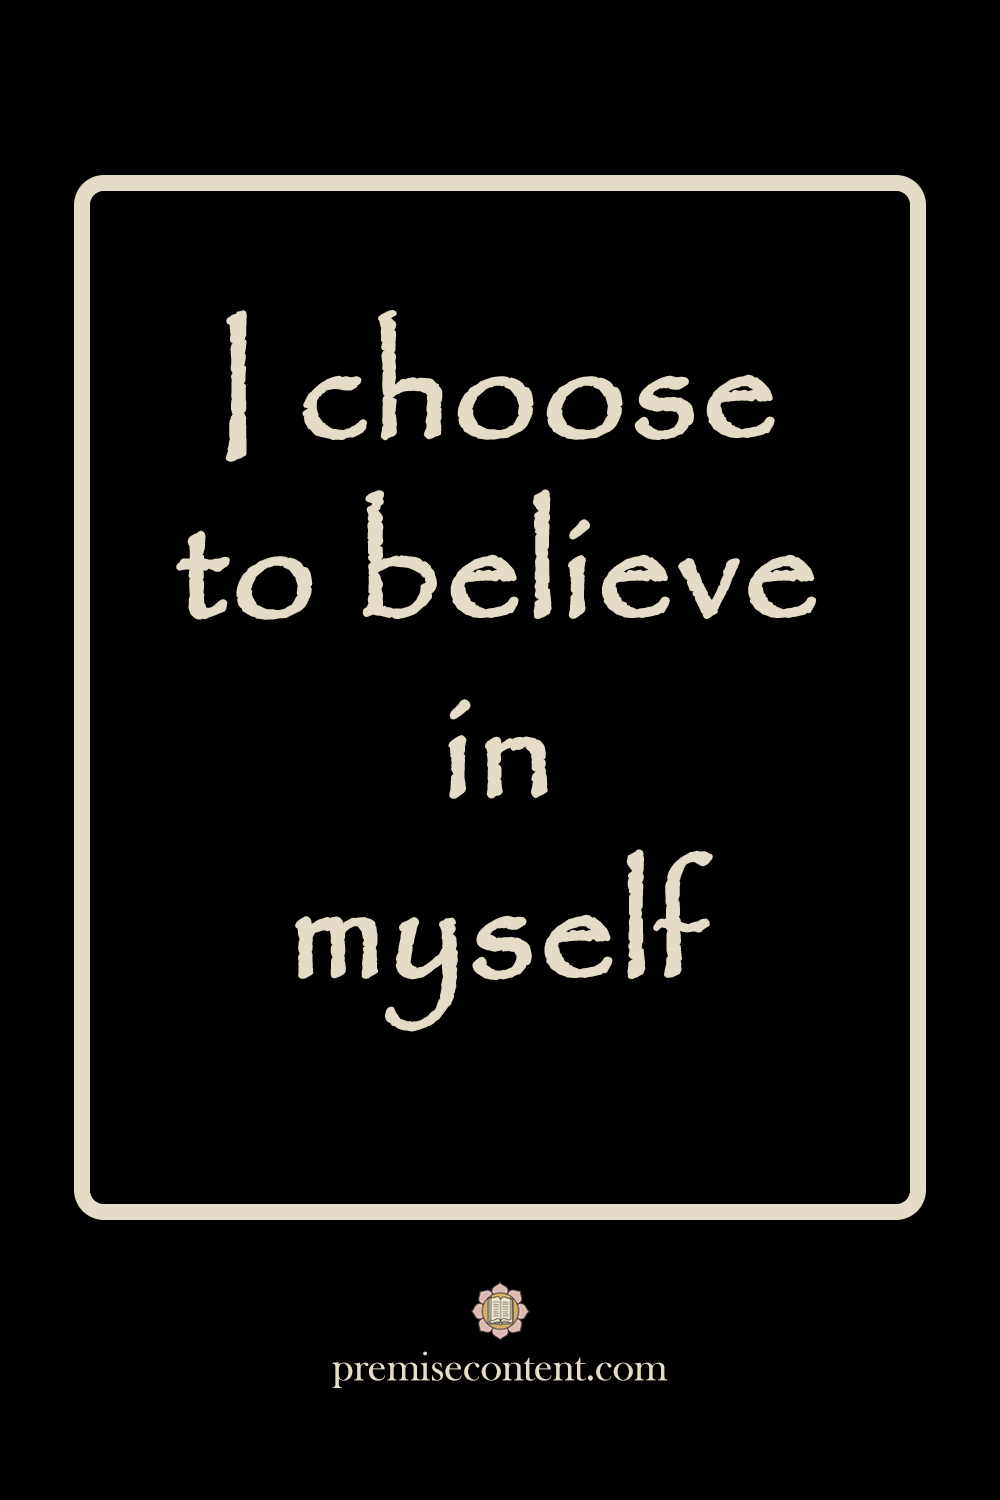 Positive Affirmation - I choose to believe in myself